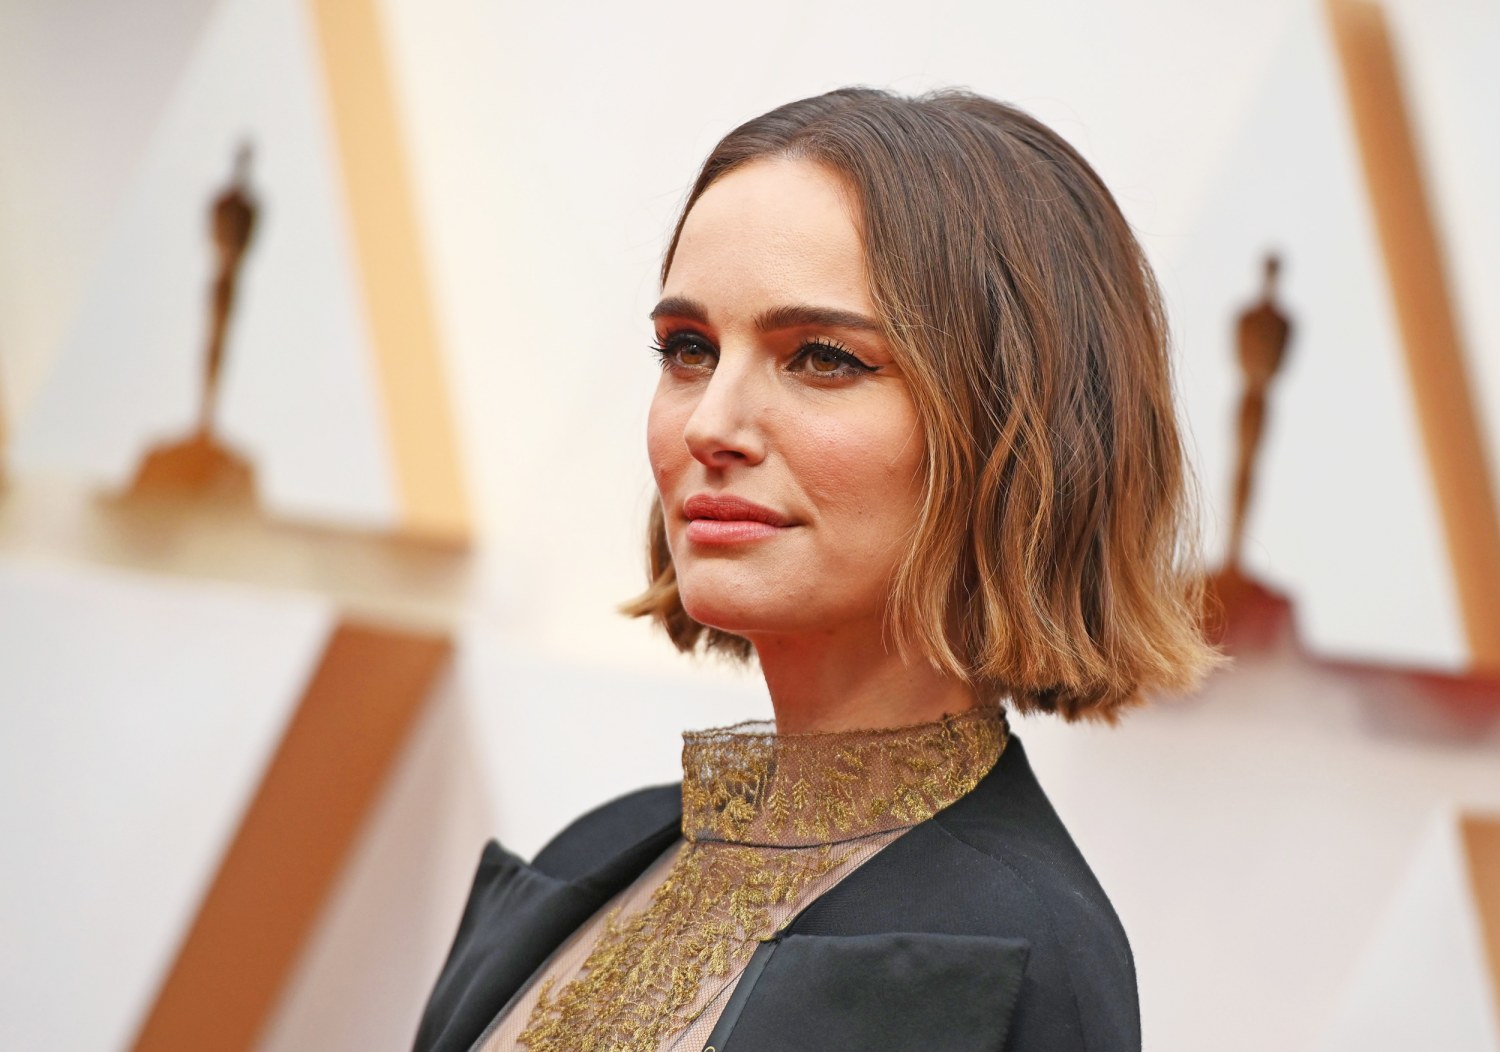 Natalie Portman says that sexualized roles as a teen harmed